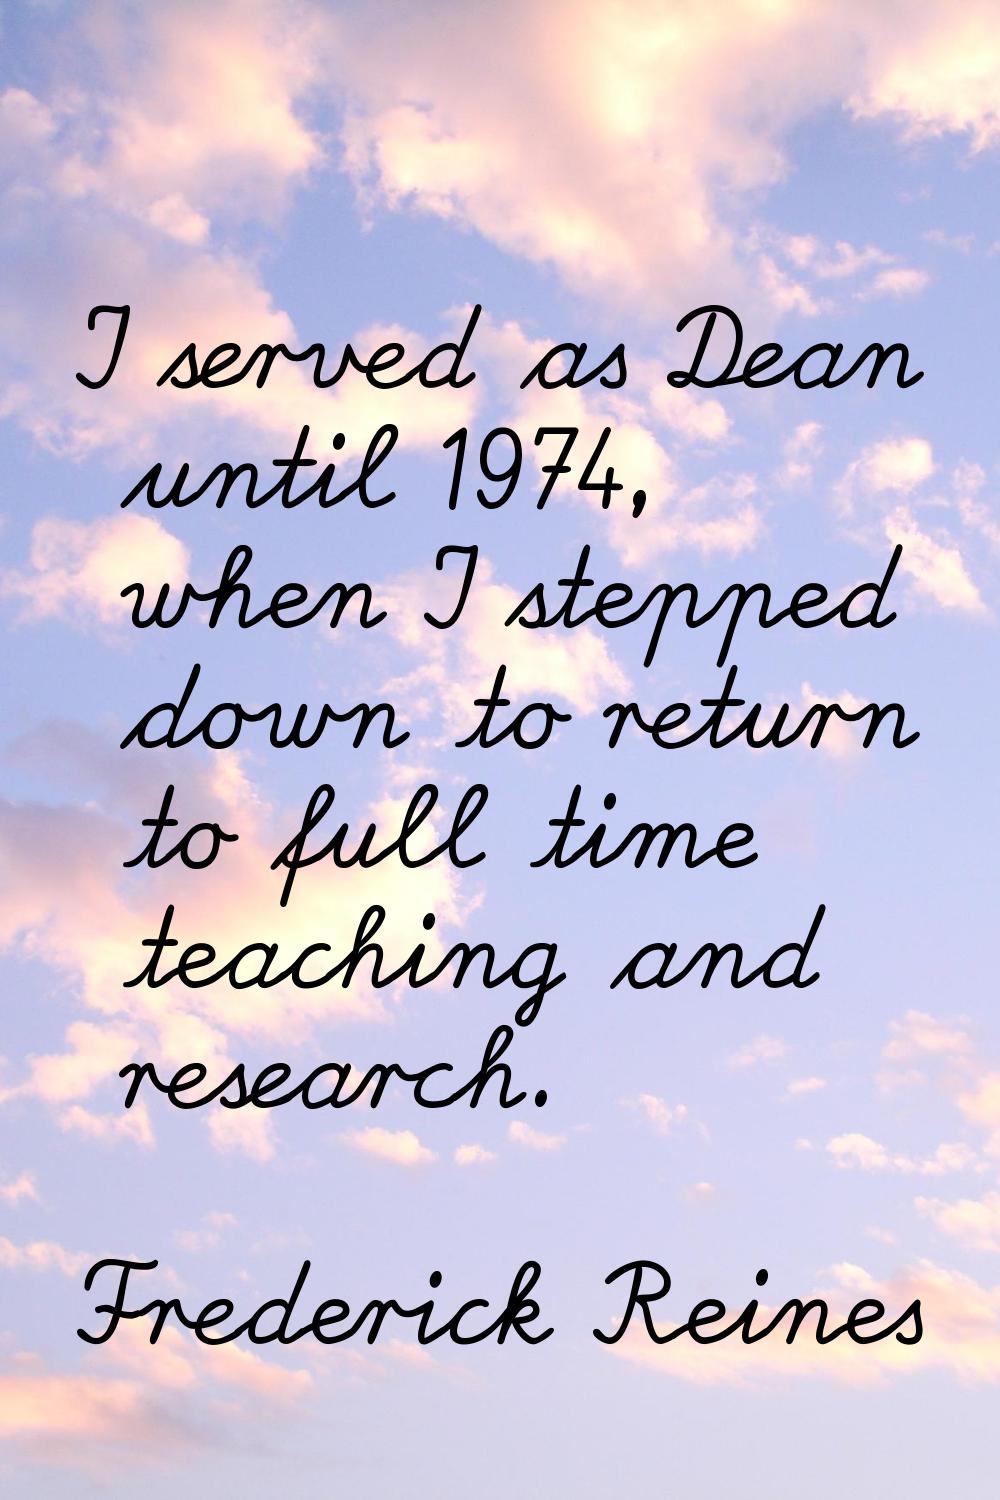 I served as Dean until 1974, when I stepped down to return to full time teaching and research.